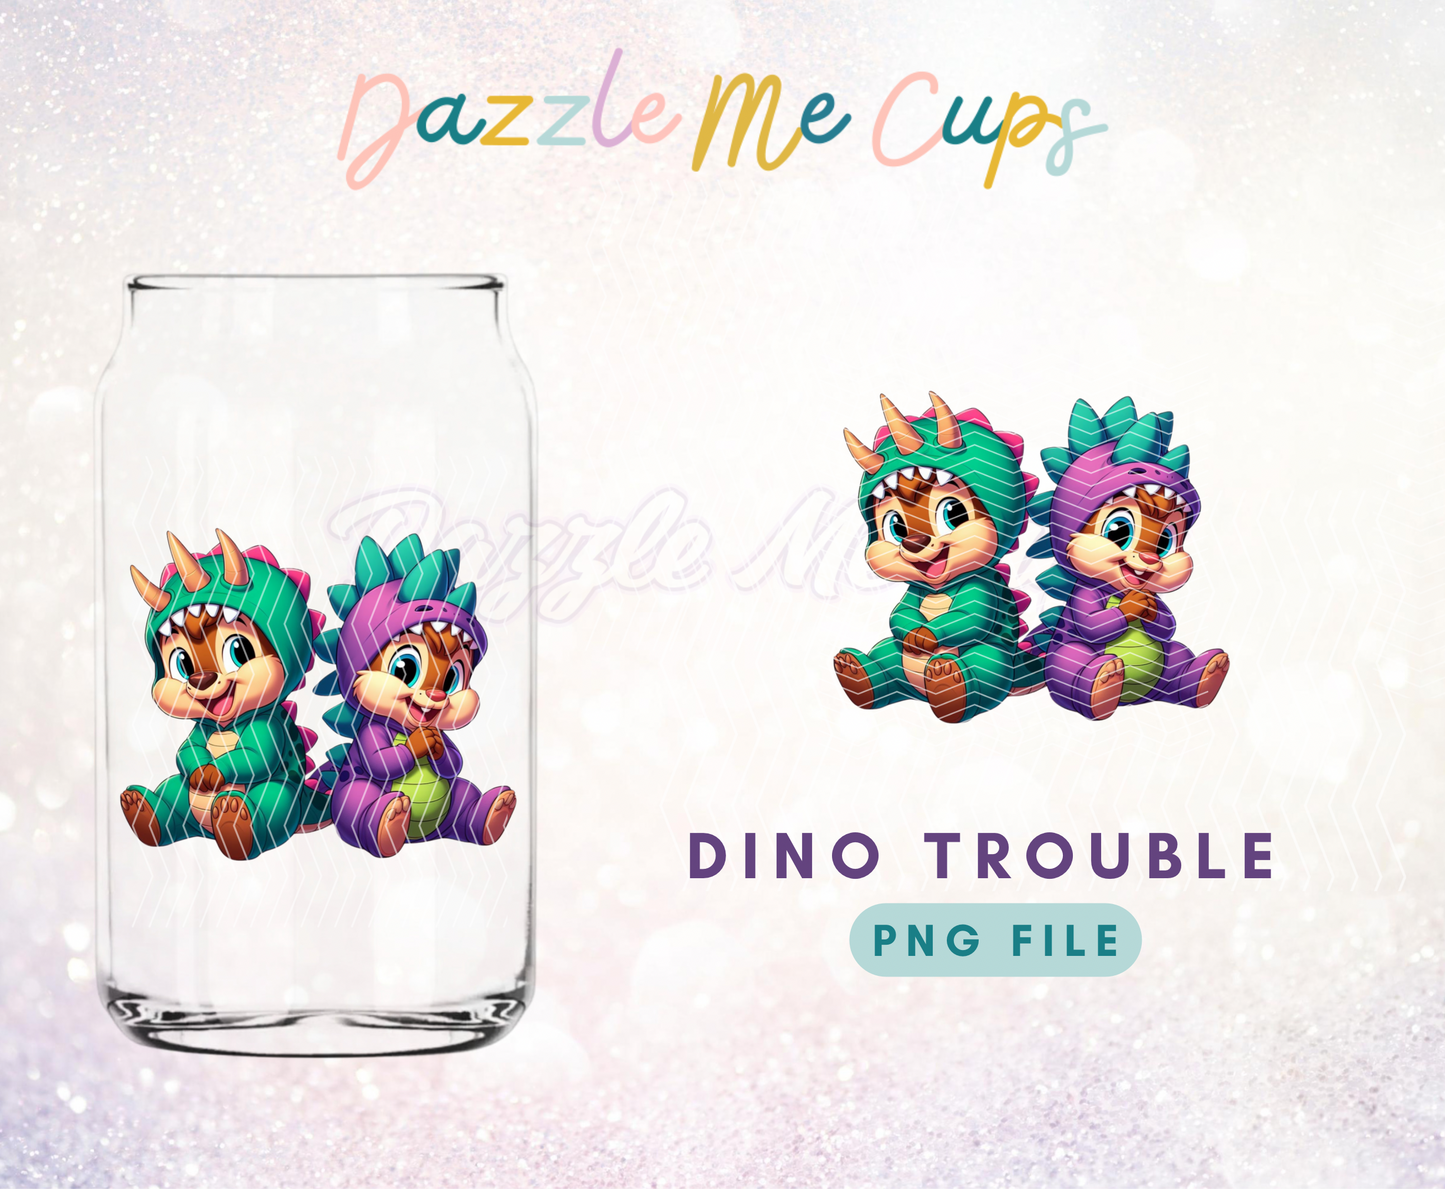 Dino trouble PNG